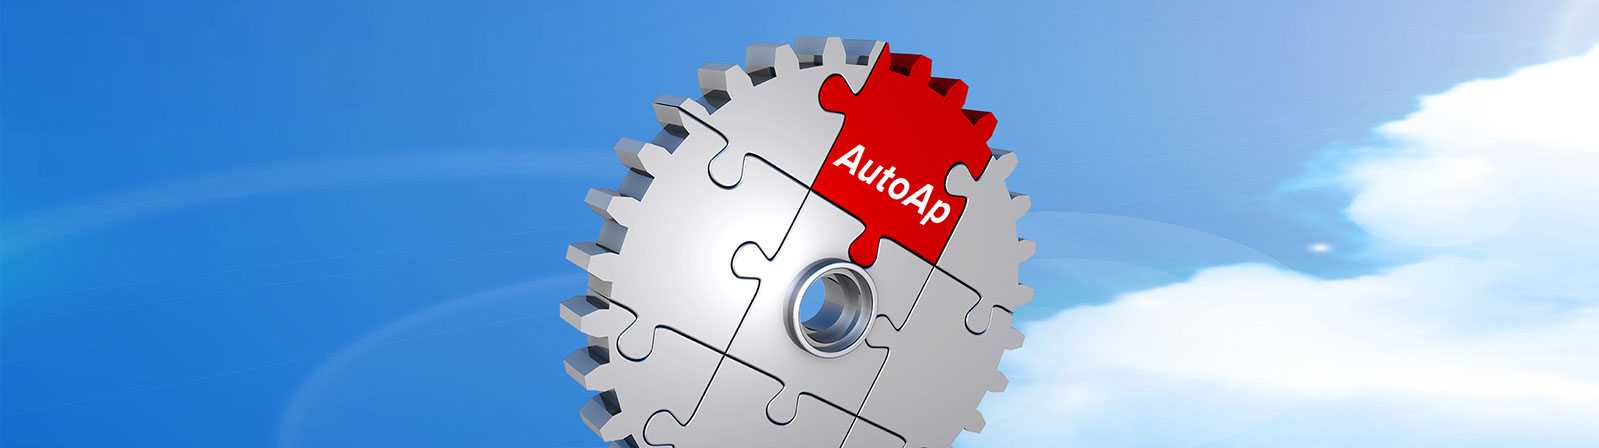 Integration partners can leverage AutoAp's recall management system to generate additional revenue.